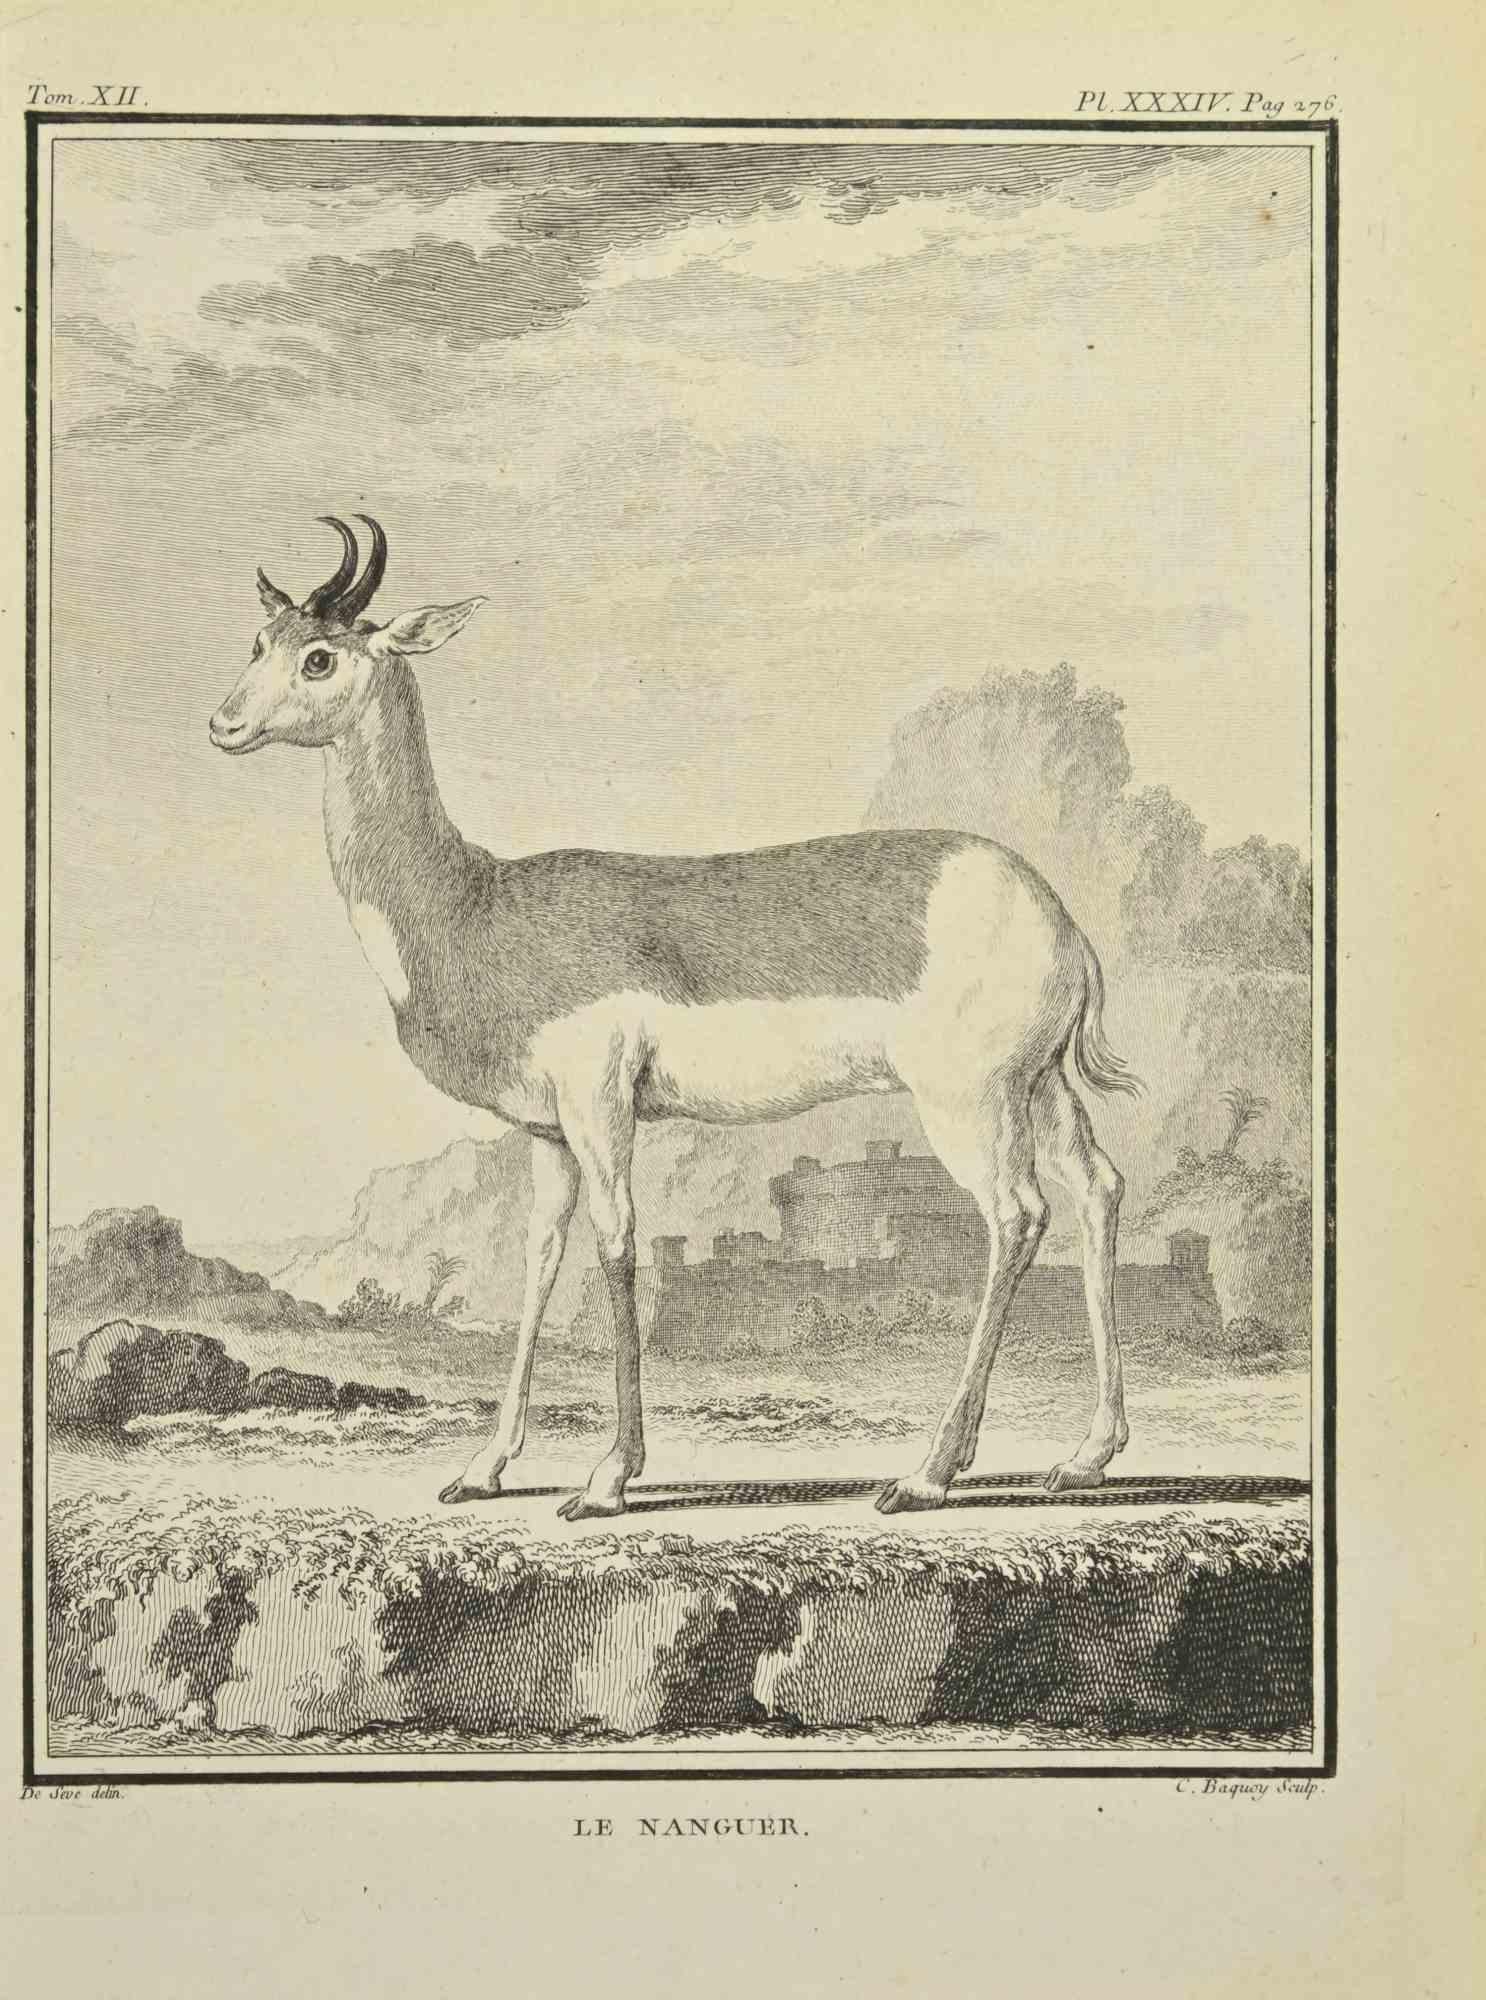 Le Naguer is an etching realized by Pierre Charles Baquoy in 1771.

It belongs to the suite "Histoire naturelle, générale et particulière avec la description du Cabinet du Roi".


Pierre Charles Baquoy (27 July 1759 – 4 February 1829) was a French